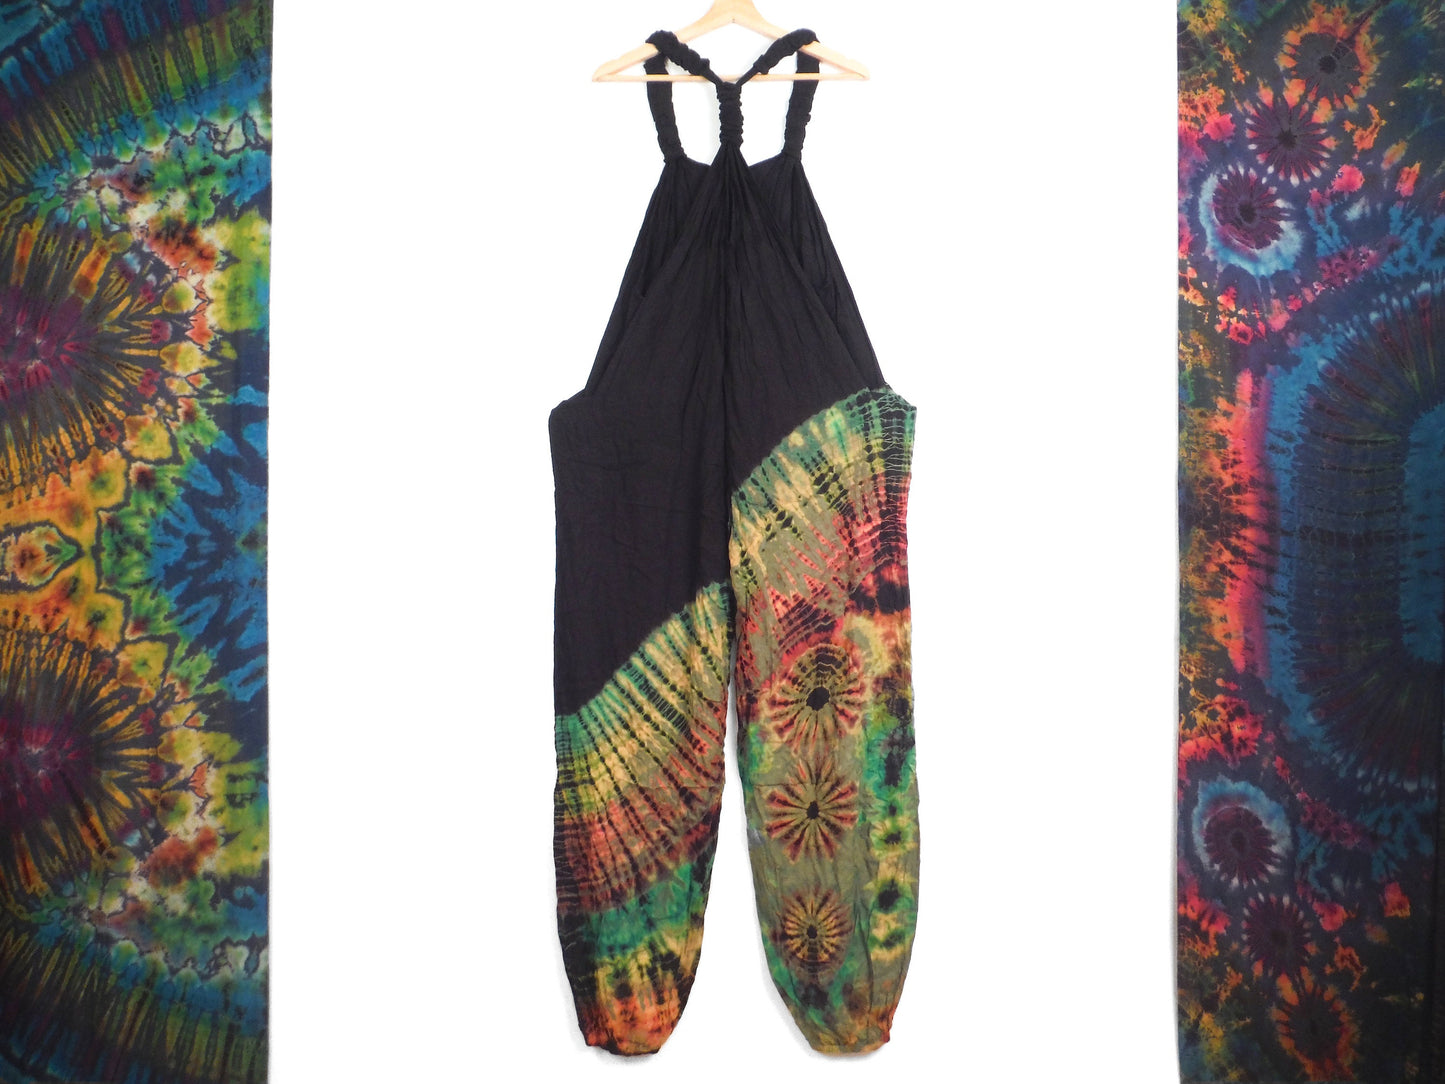 Half Tie-Dye Dungarees - Black and Moss Green